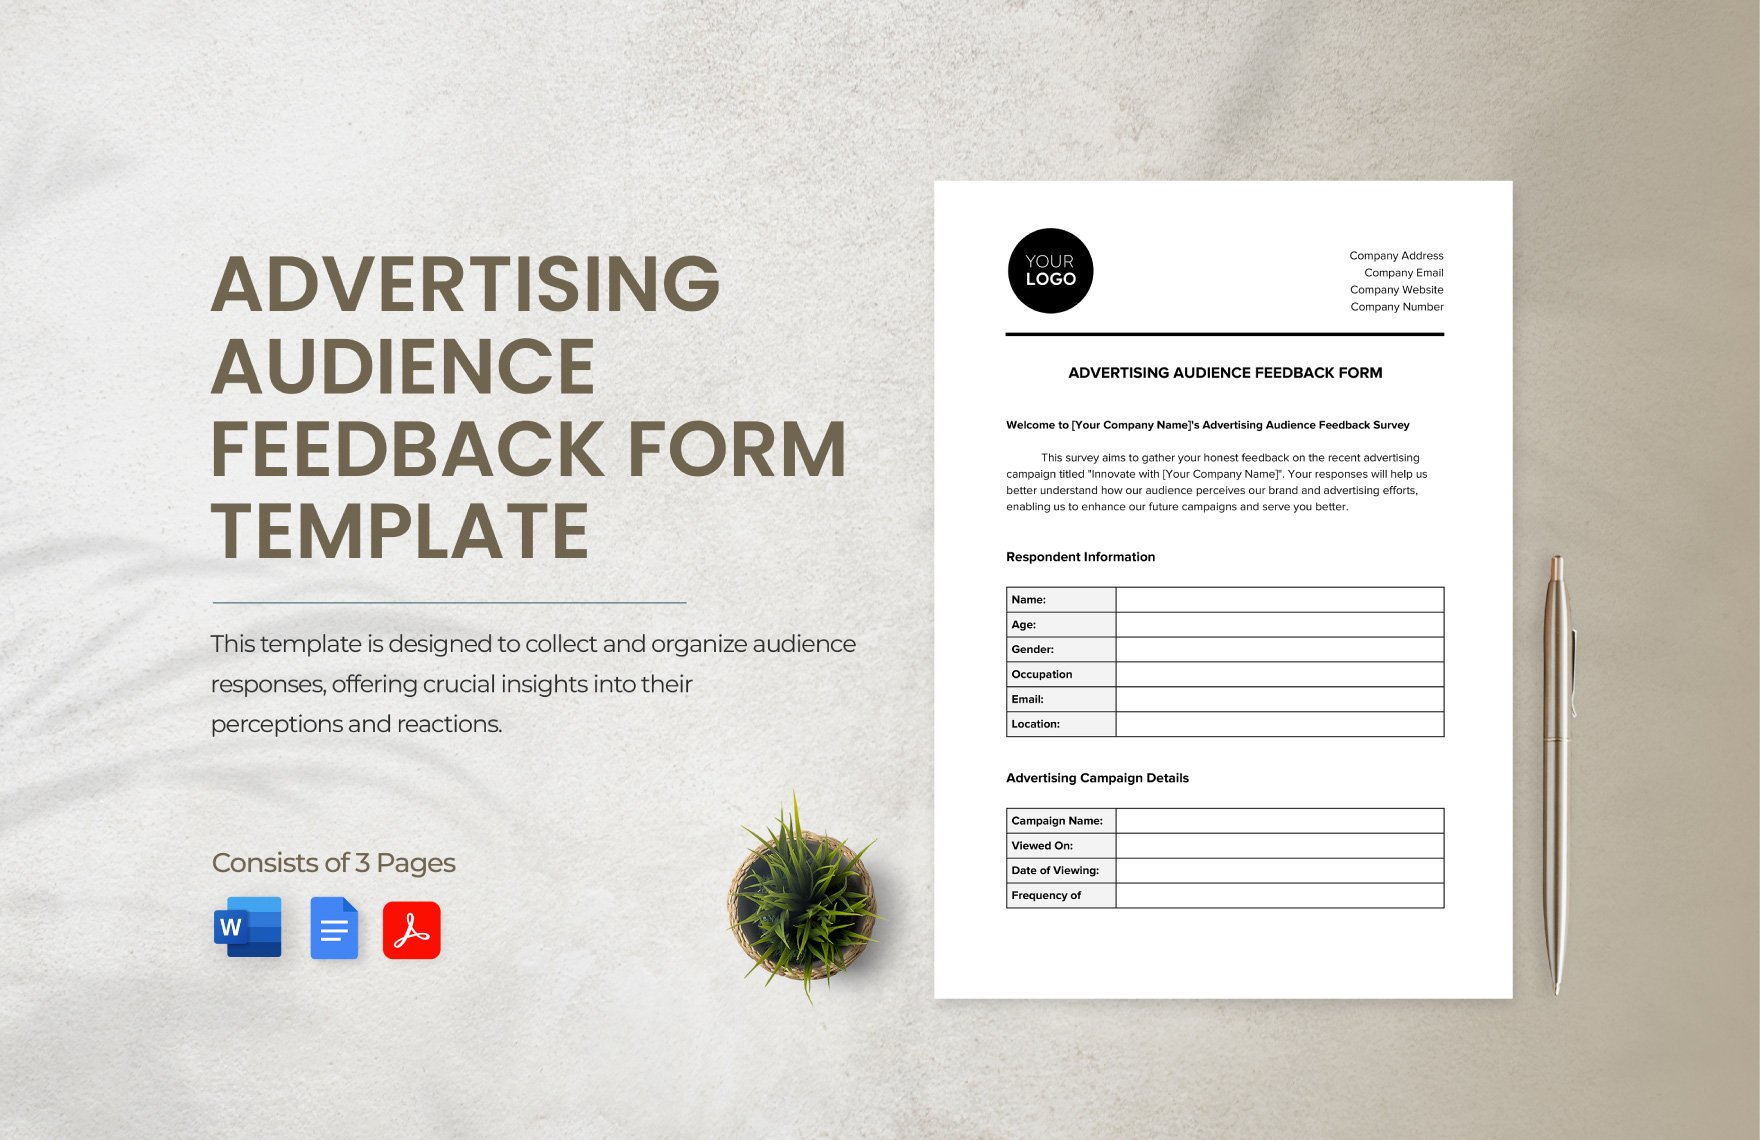 Advertising Audience Feedback Form Template in Word, Google Docs, PDF